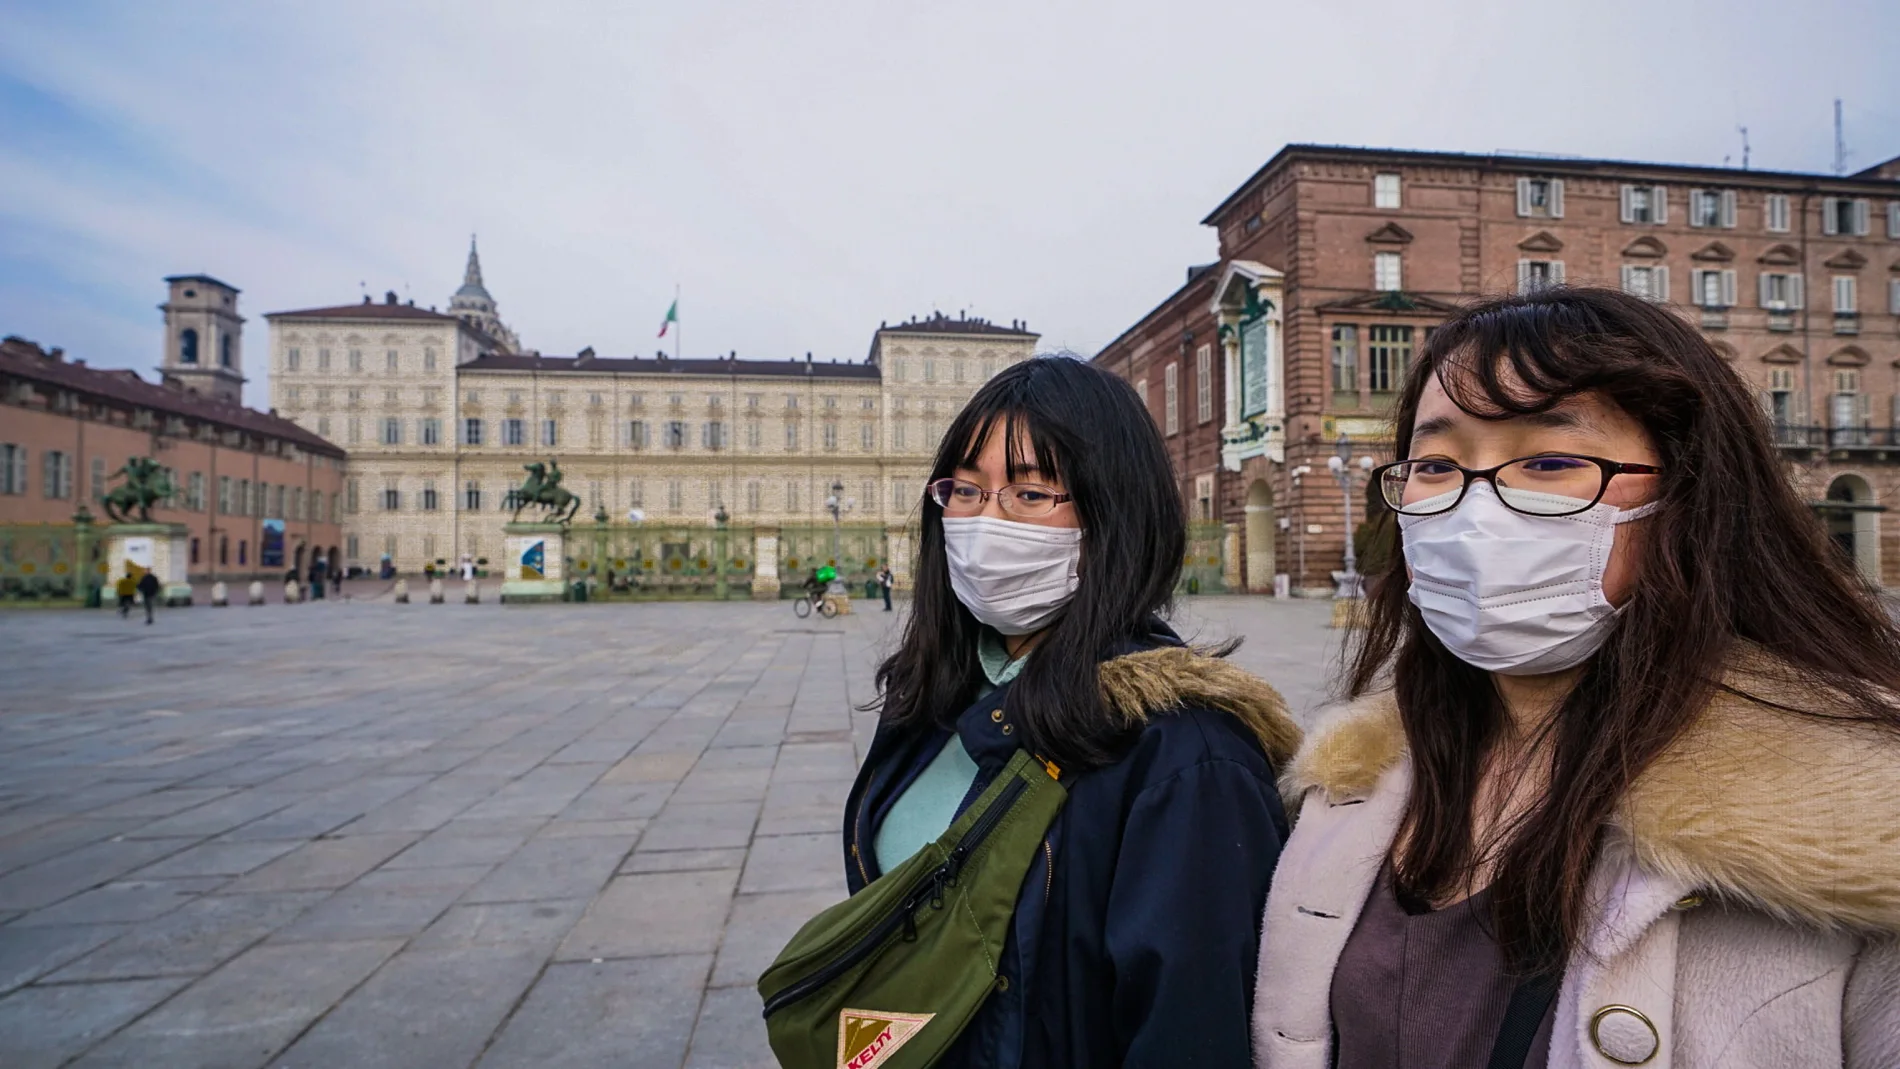 Turin (Italy), 25/02/2020.- Two Japanese tourists wear protective face masks while walking around Piazza Castello ('Castle Square') in Turin, northern Italy, 25 February 2020. Italian authorities are implementing hygienic measures to contain the ongoing outbreak of the SARS-CoV-2 coronavirus that causes the COVID-19 respiratory disease. At least 228 cases have been reported in Italy so far, most of them concentrated in the northern regions of Lombardy and Veneto. The disease has killed at least seven people in the Mediterranean country, according to official reports. (Italia, Japón) EFE/EPA/TINO ROMANO